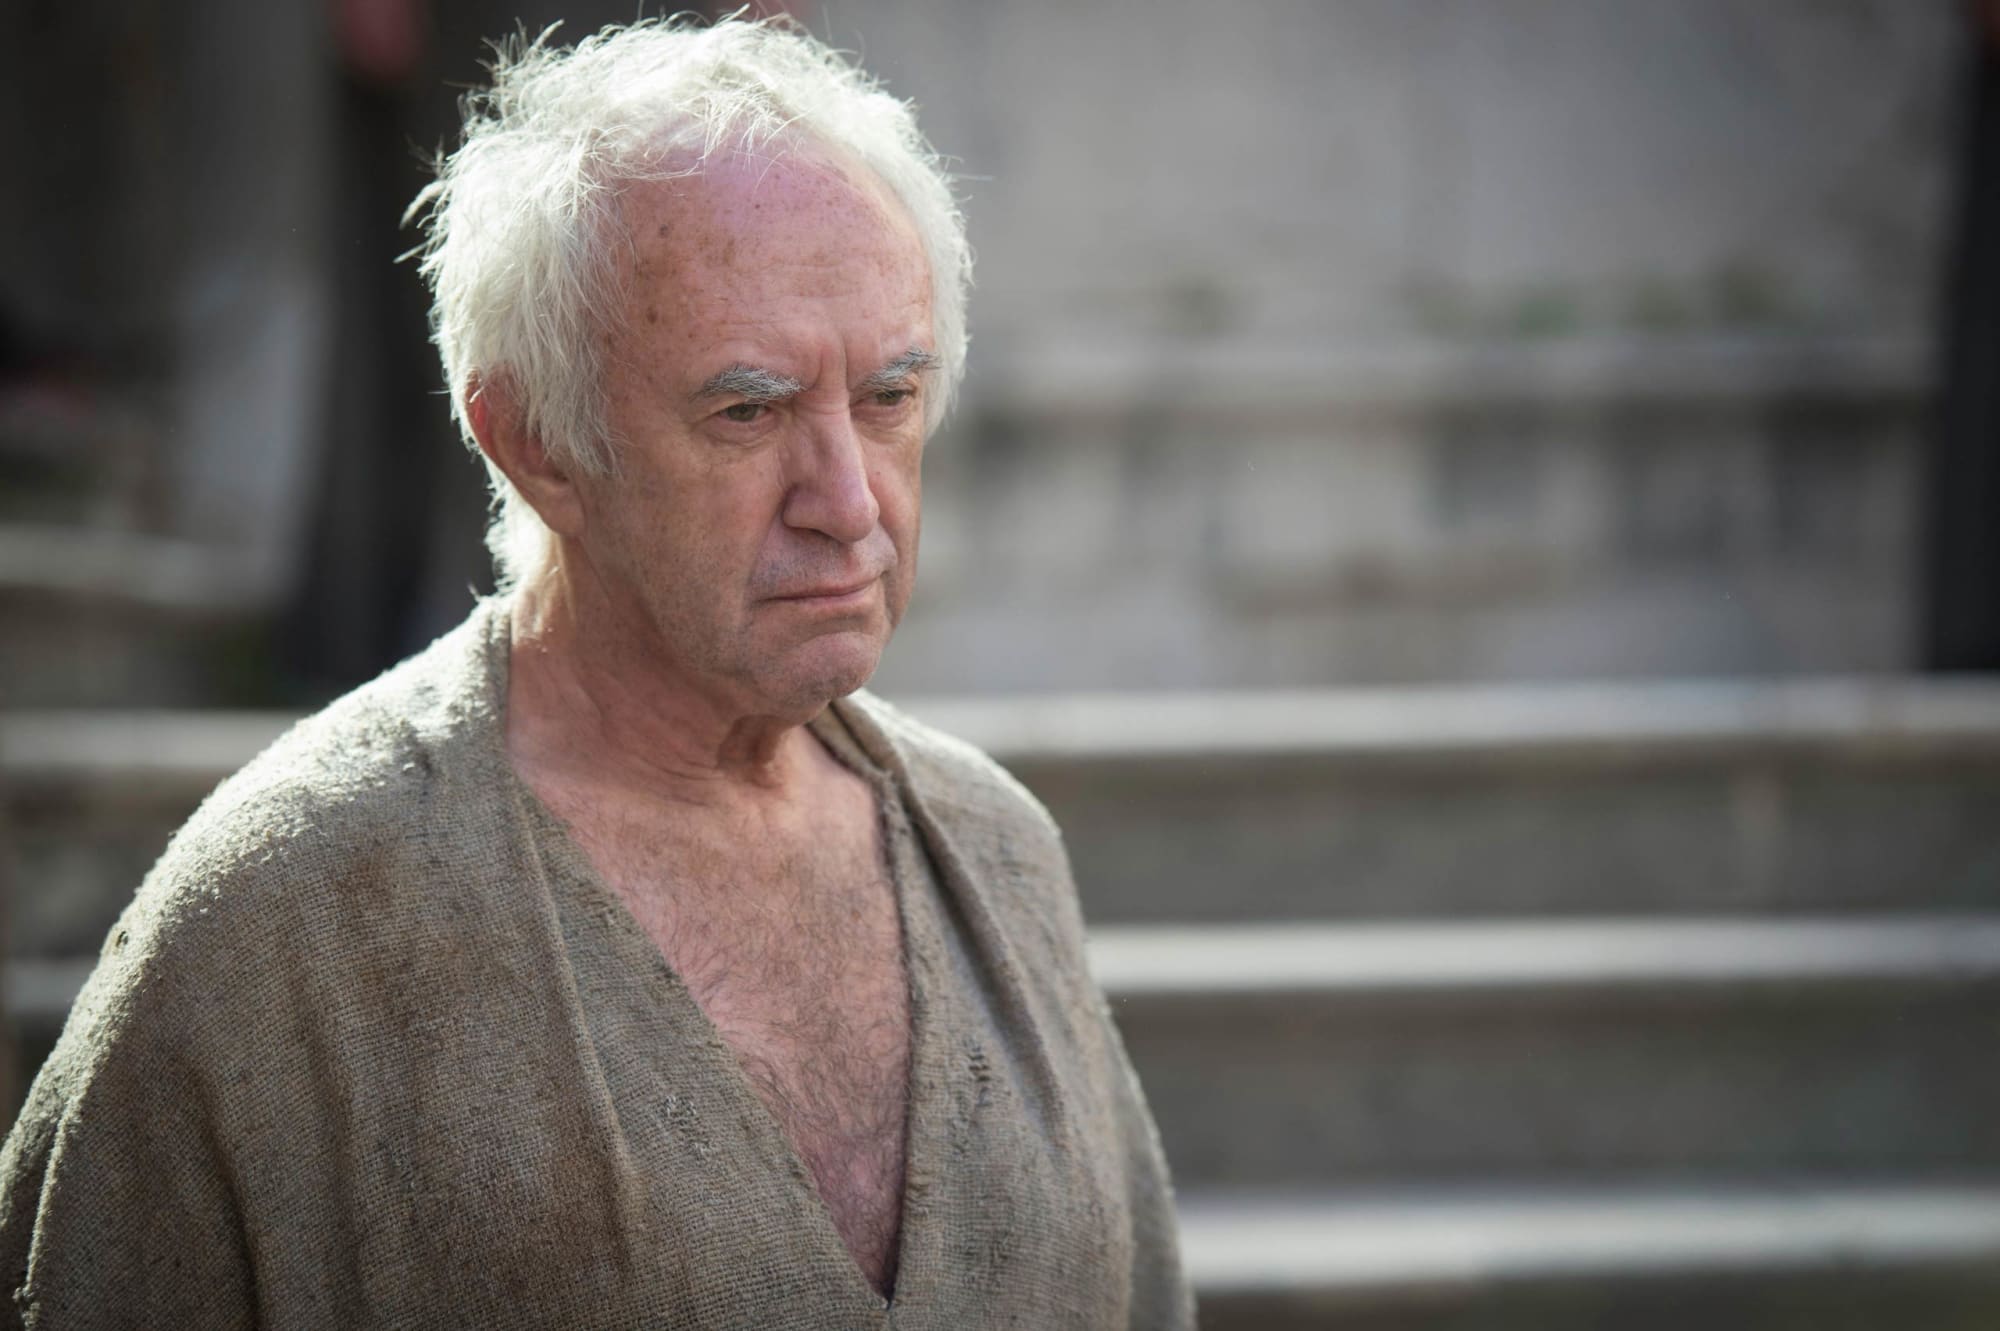 Game of Thrones star Jonathan Pryce (High Sparrow) was hospitalized with COVID-19